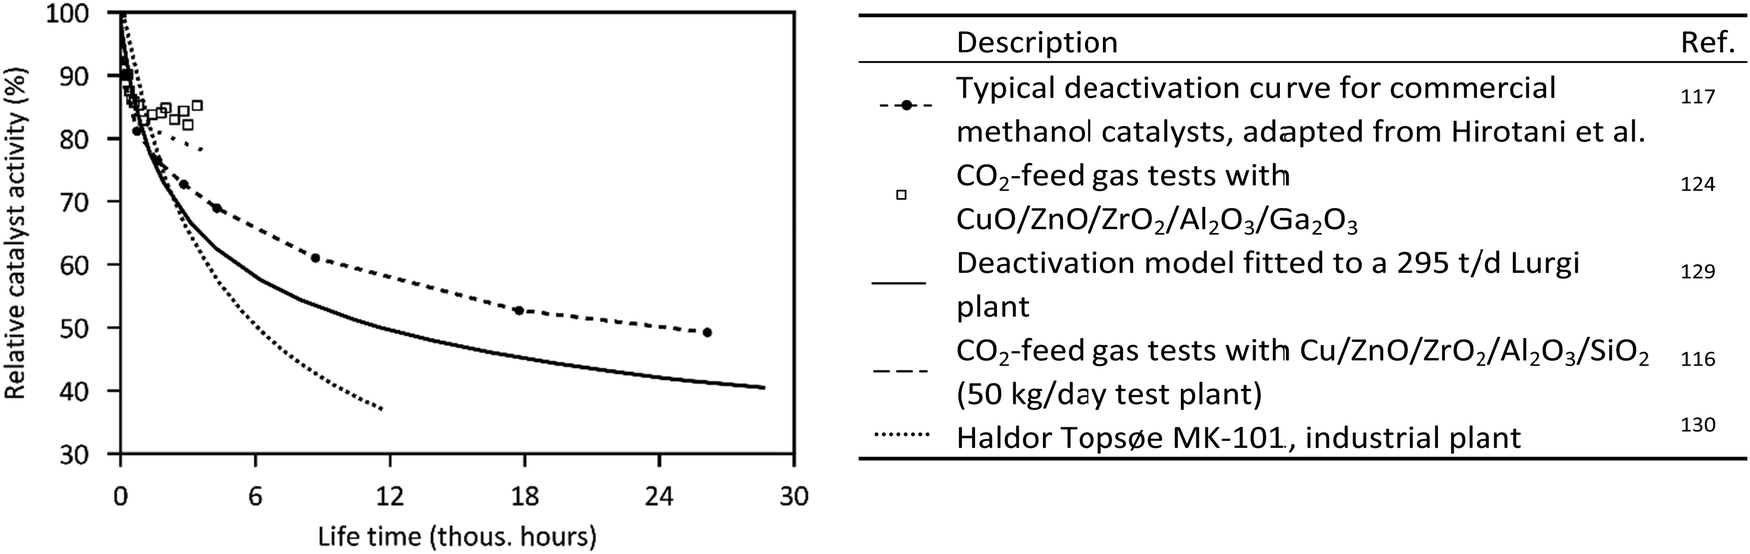 Power To Liquid Via Synthesis Of Methanol Dme Or Fischer Tropsch Fuels A Review Energy Environmental Science Rsc Publishing